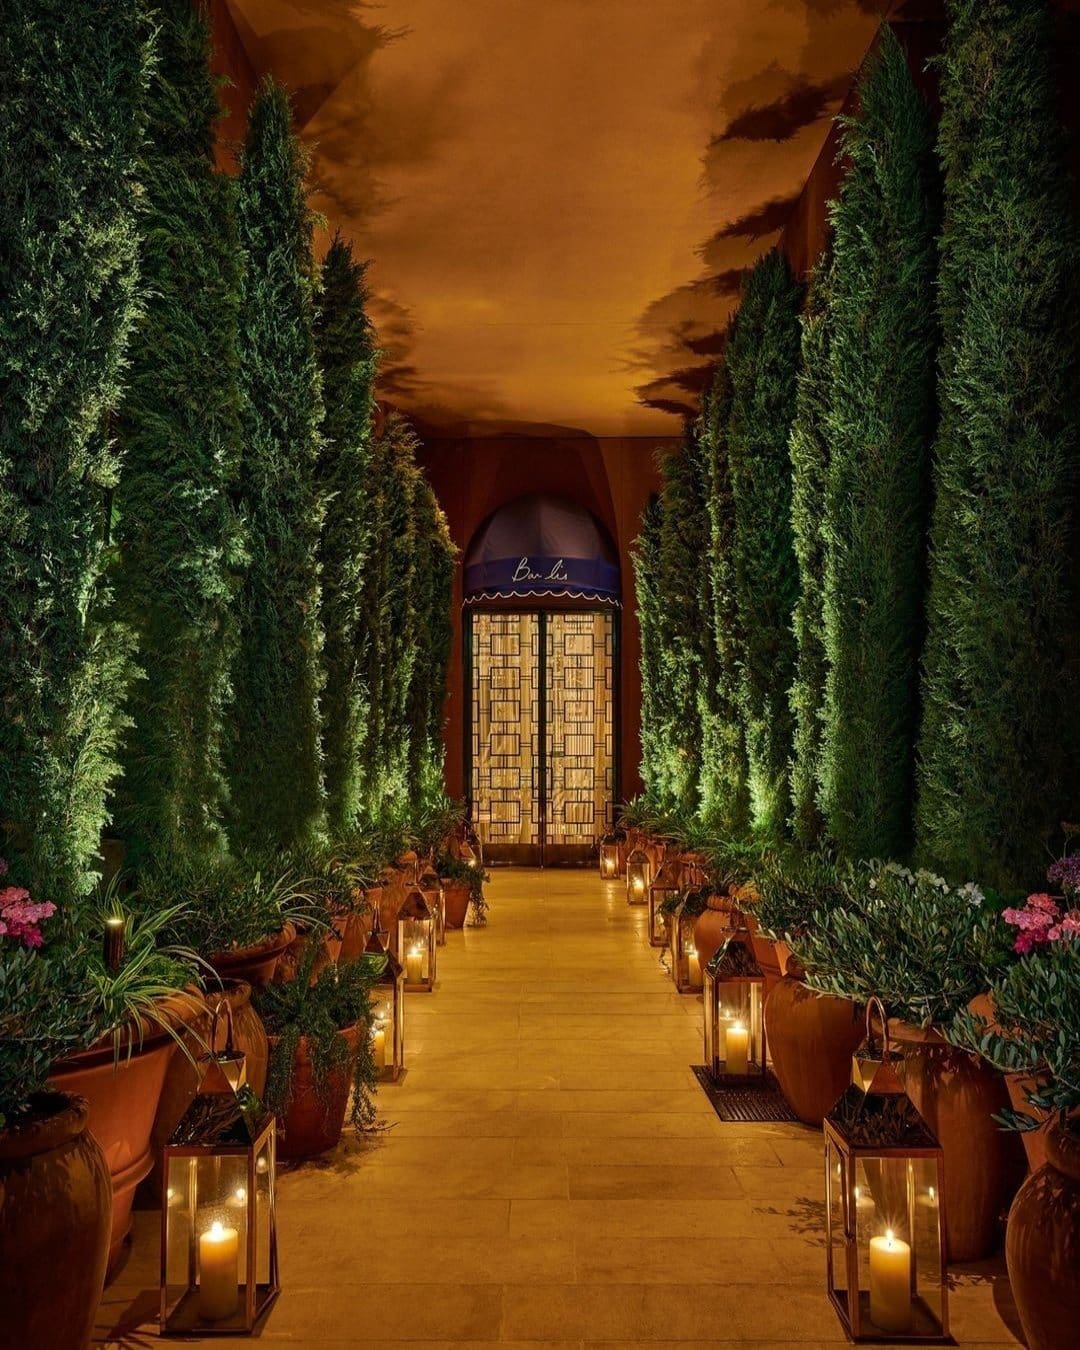 Tree-lined entrance to Bar Lis in Los Angeles